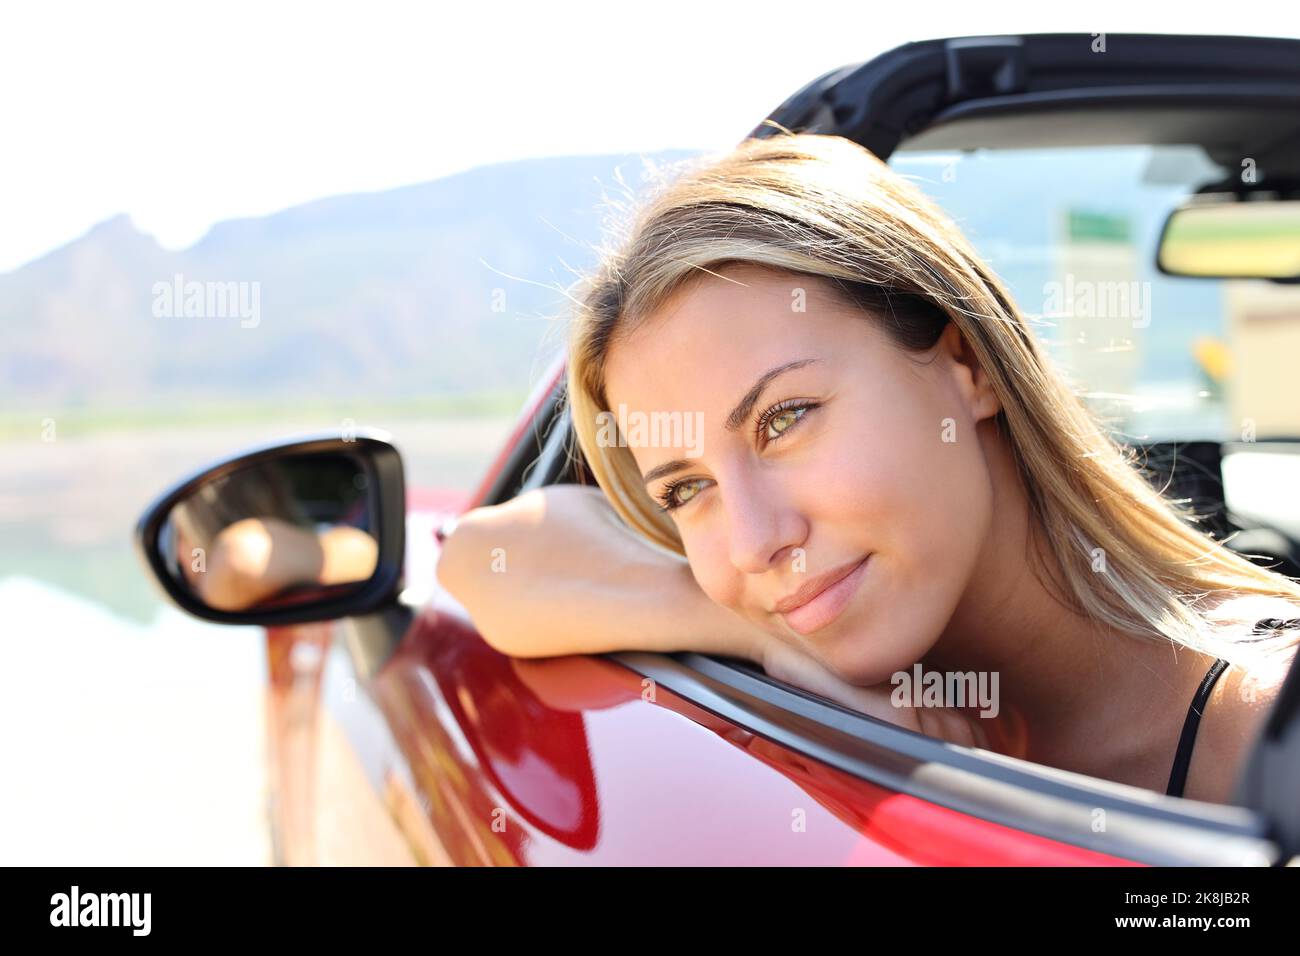 Portrait of a happy convertible car driver looking away Stock Photo